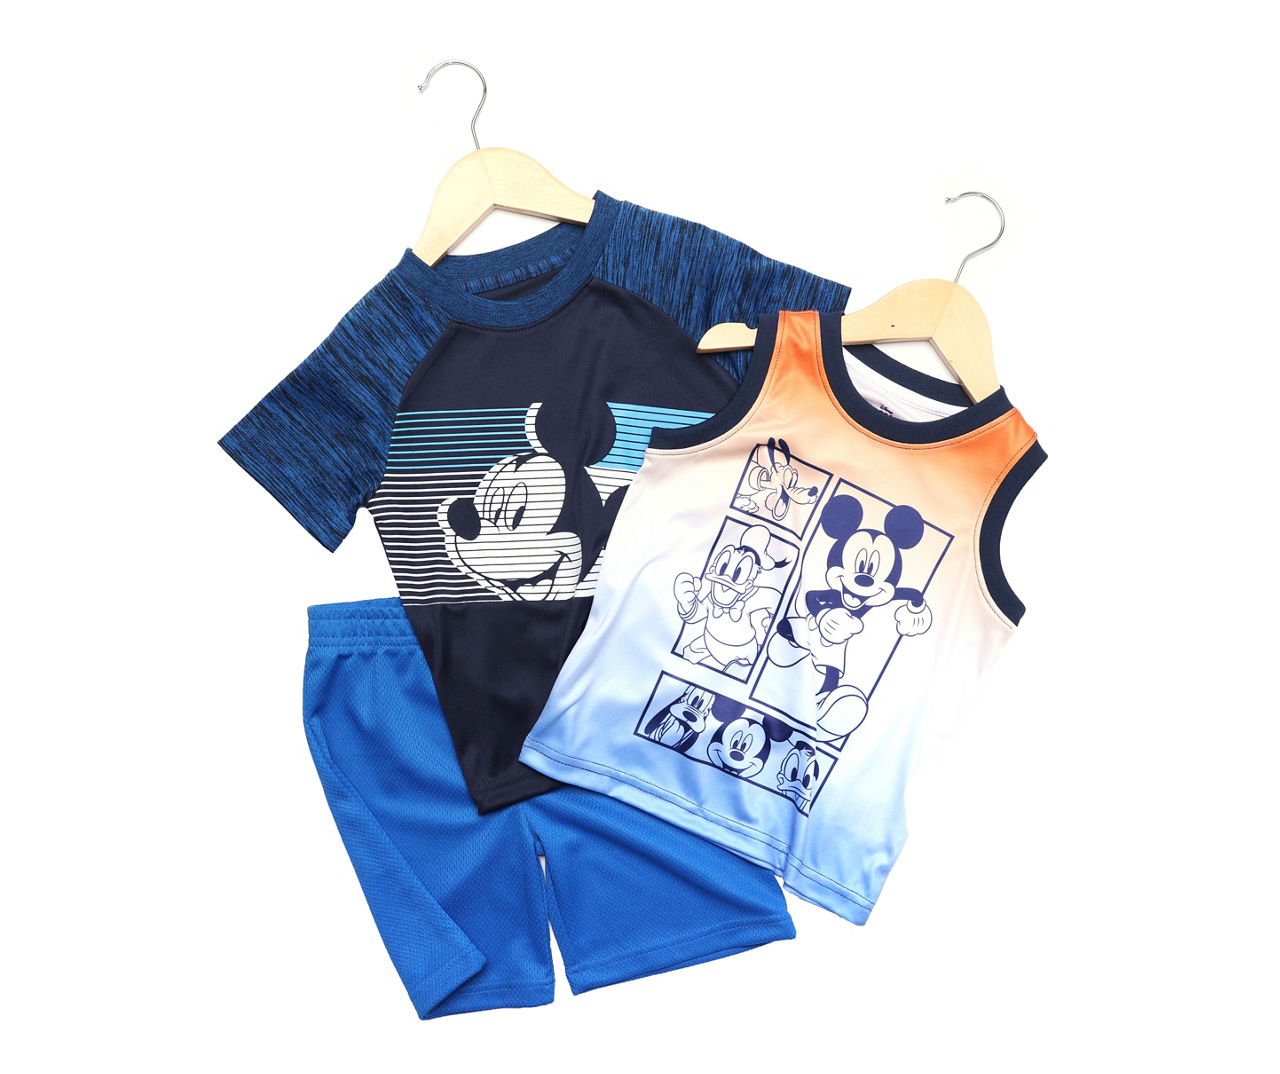 Toddler Size 3T Blue Ombre Mickey 3-Piece Performance Outfit